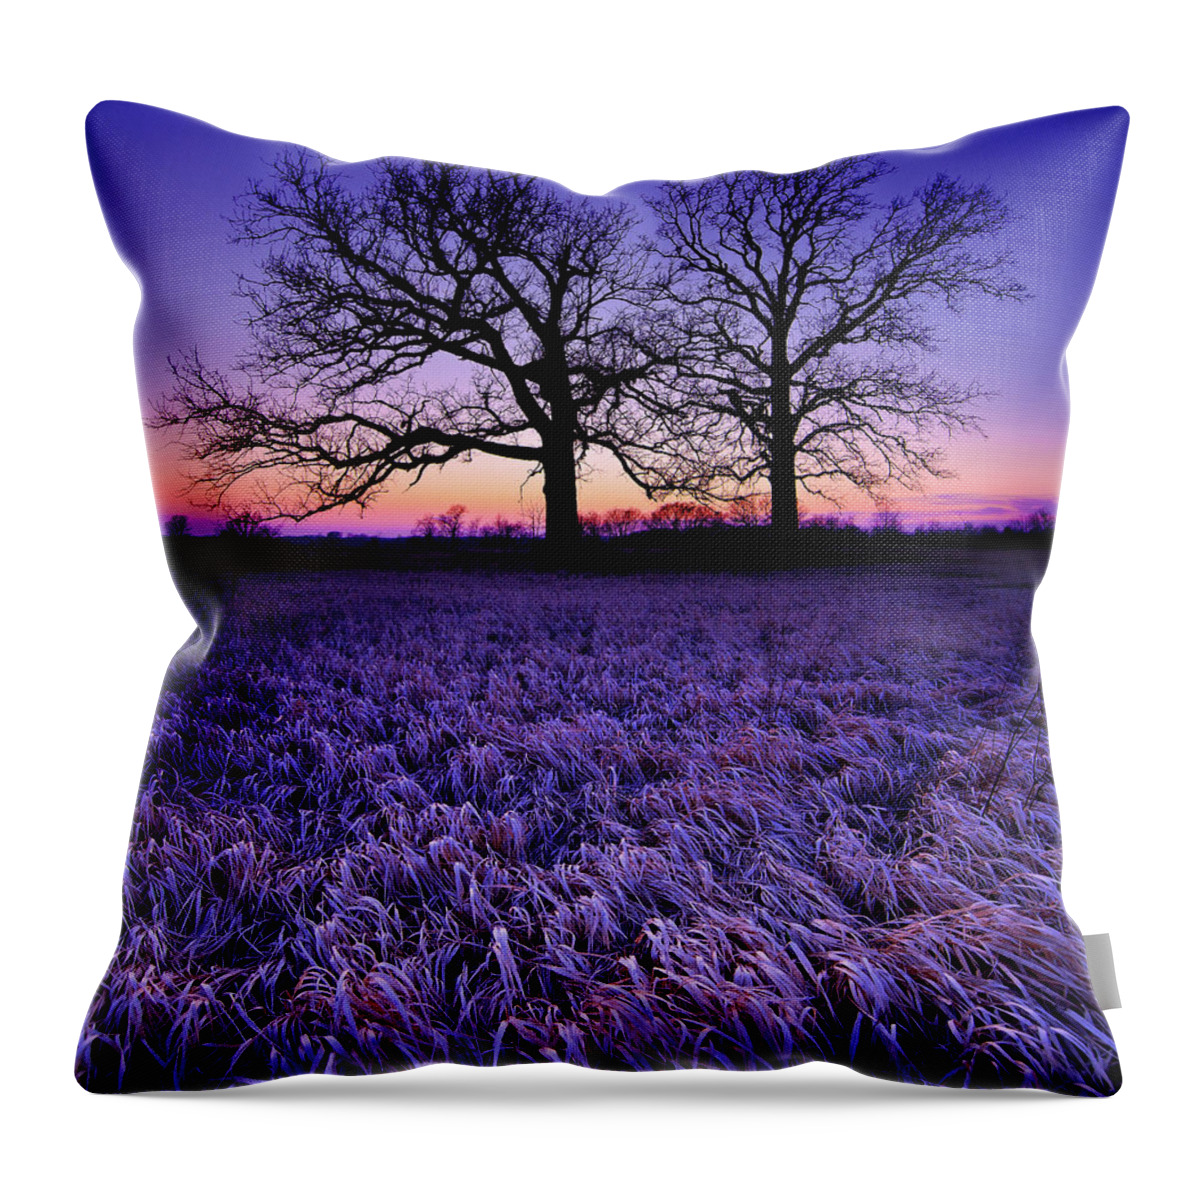 Tranquility Throw Pillow featuring the photograph Twilight Field by James Jordan Photography